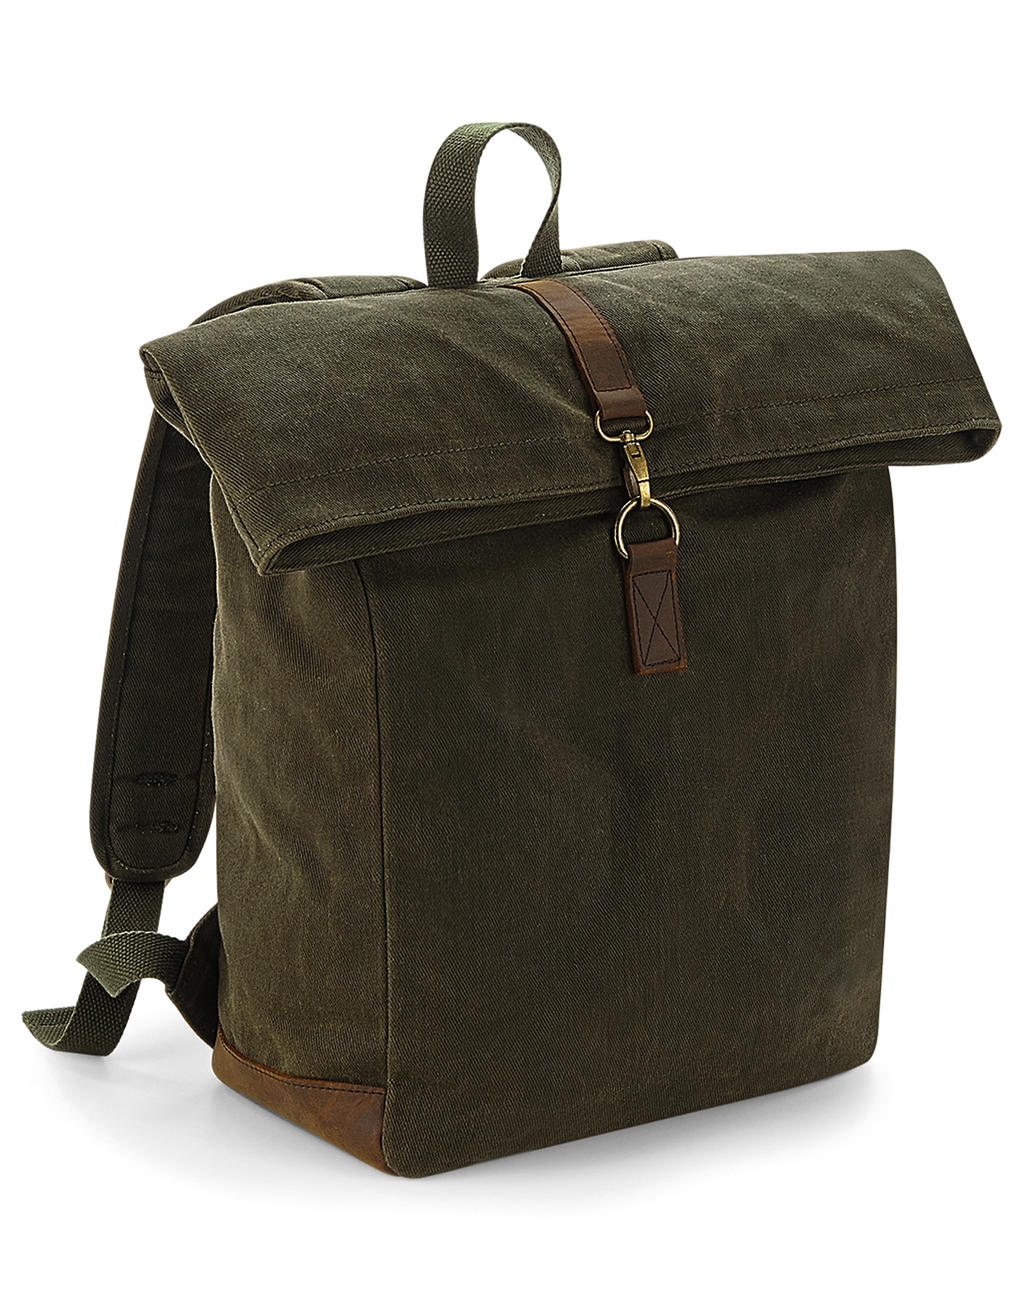  Heritage Waxed Canvas Backpack in Farbe Black